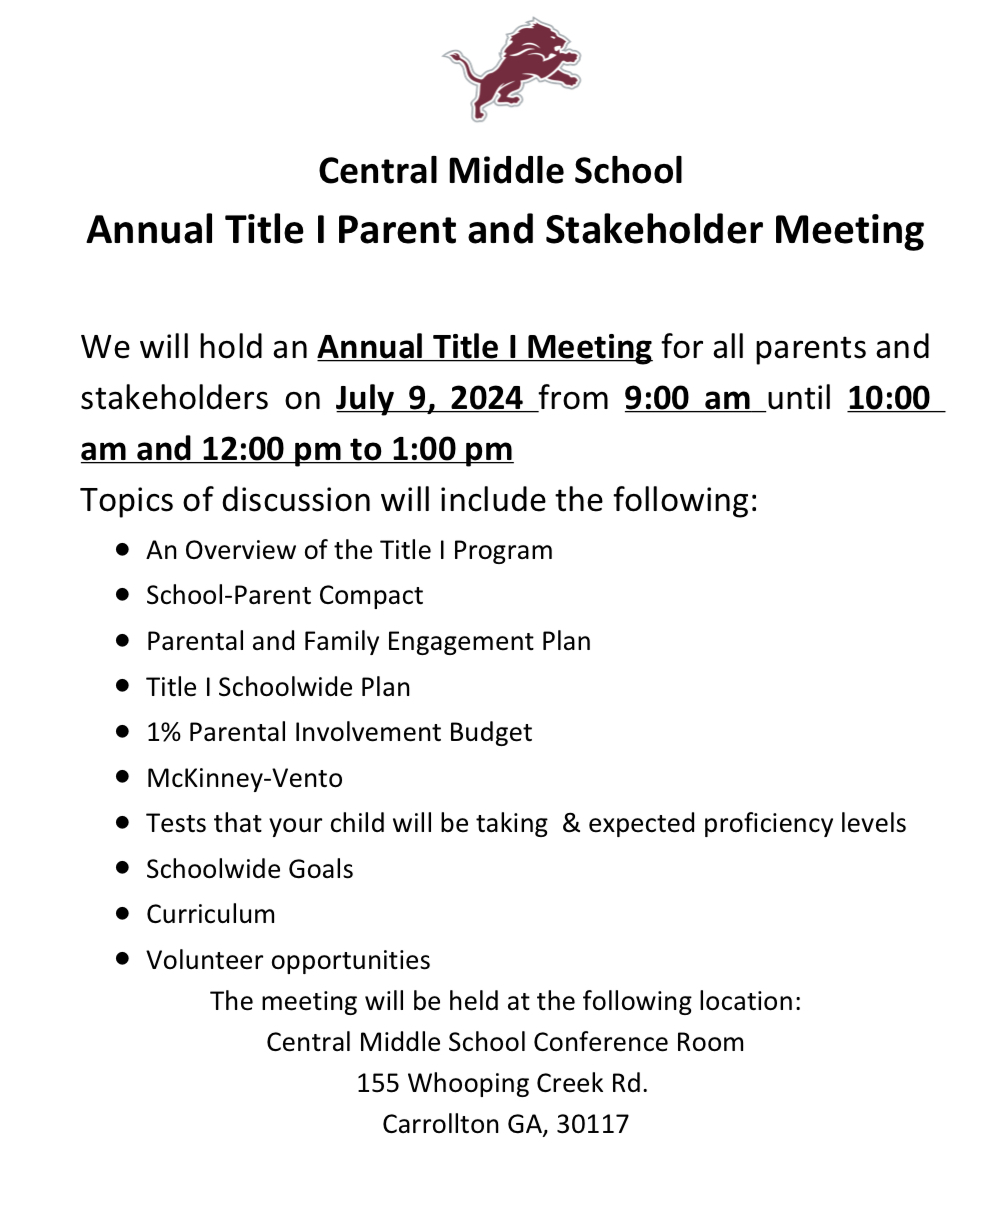 fy24 annual title I parent and stakeholder meeting